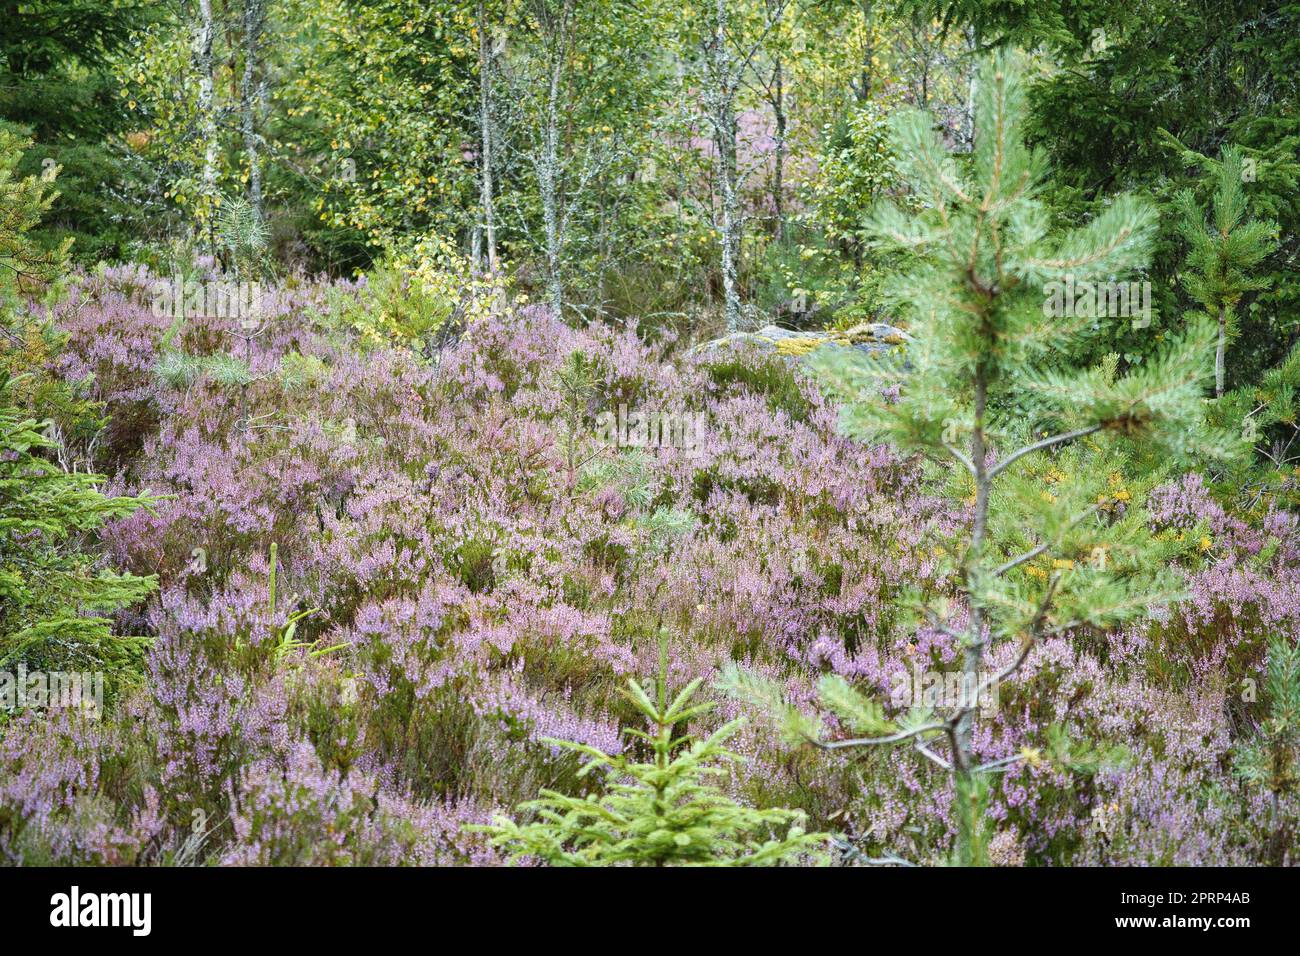 Heather field. Branches with fine filigree purple flowers. Dreamy in the sunlight Stock Photo